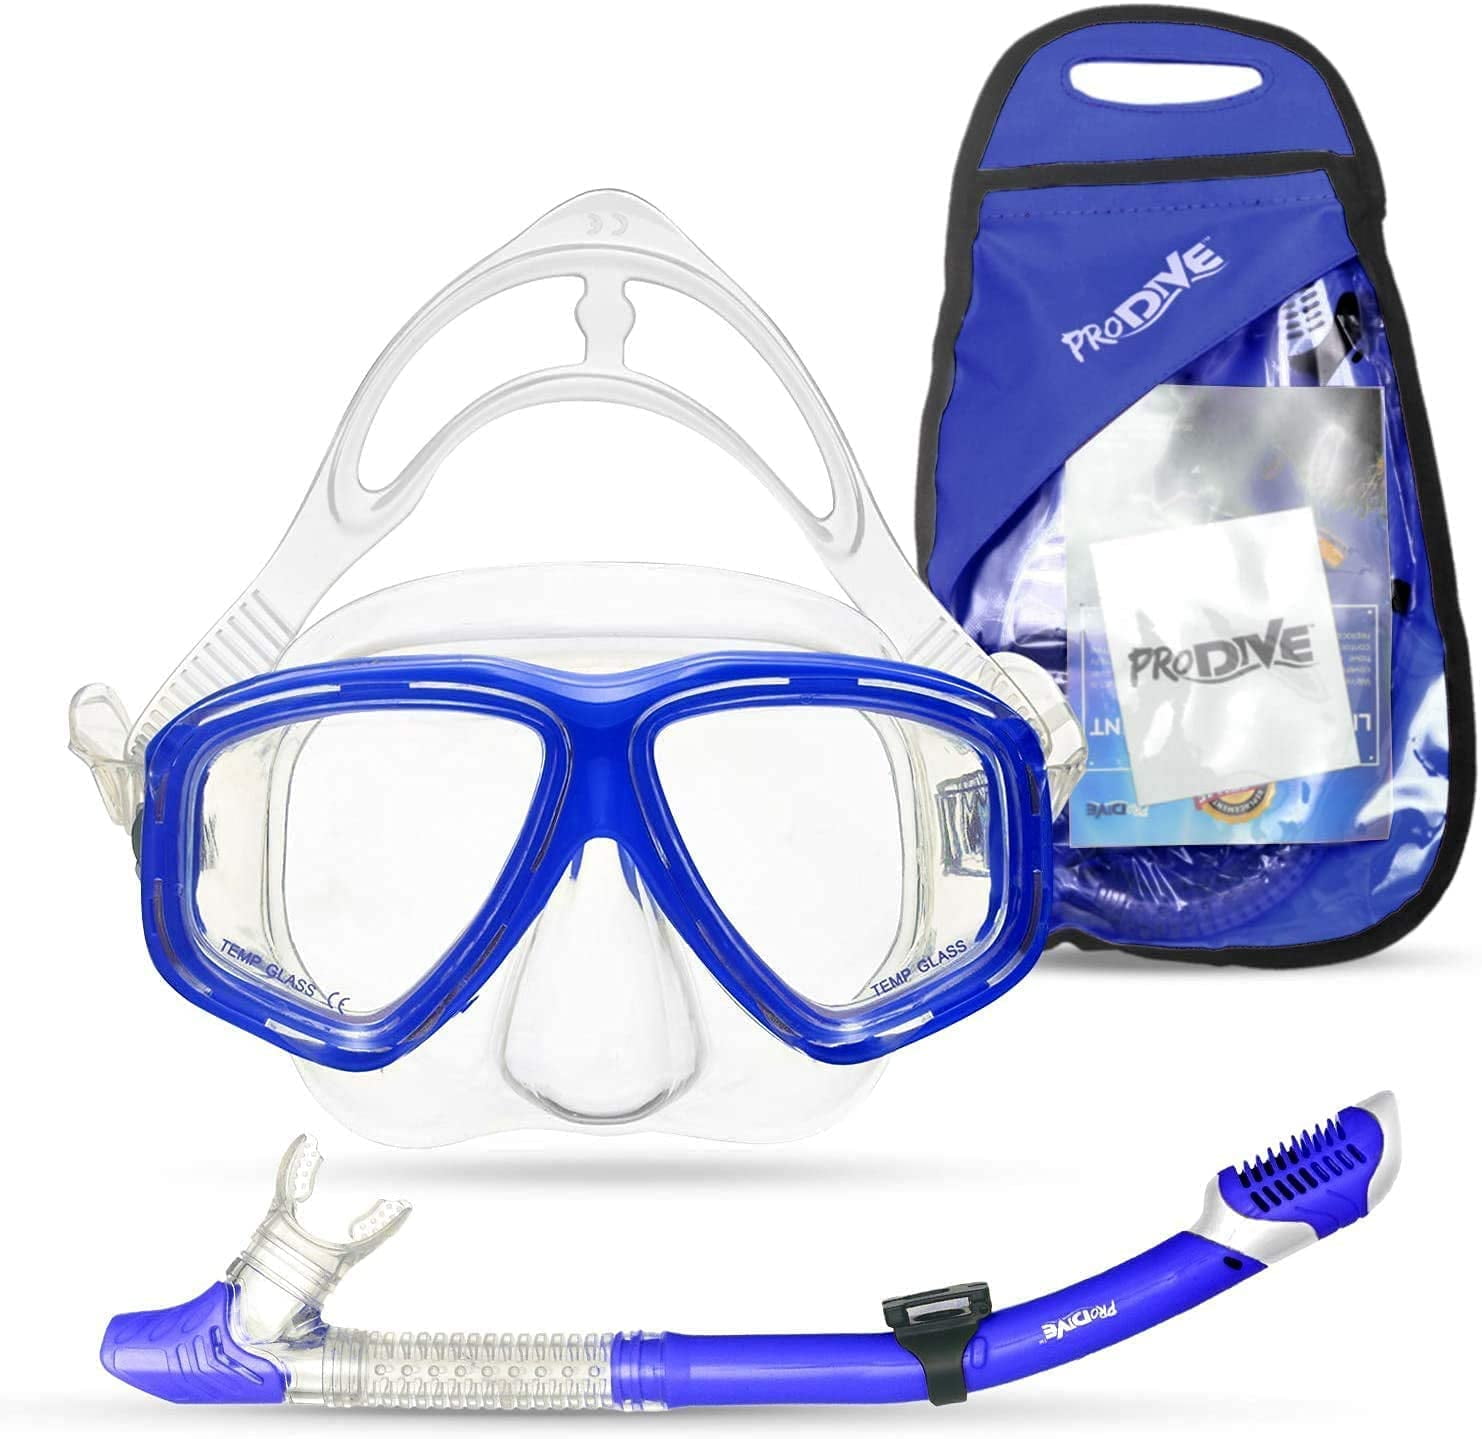 4 in 1 Snorkeling Gear with Adjustable Dive Flippers Professional Snorkeling Set for Snorkeling Swimming Scuba Diving 2022 Snorkel Set for Adults Anti-Fog Mask Dry Top Snorkel and Swim Earplugs 